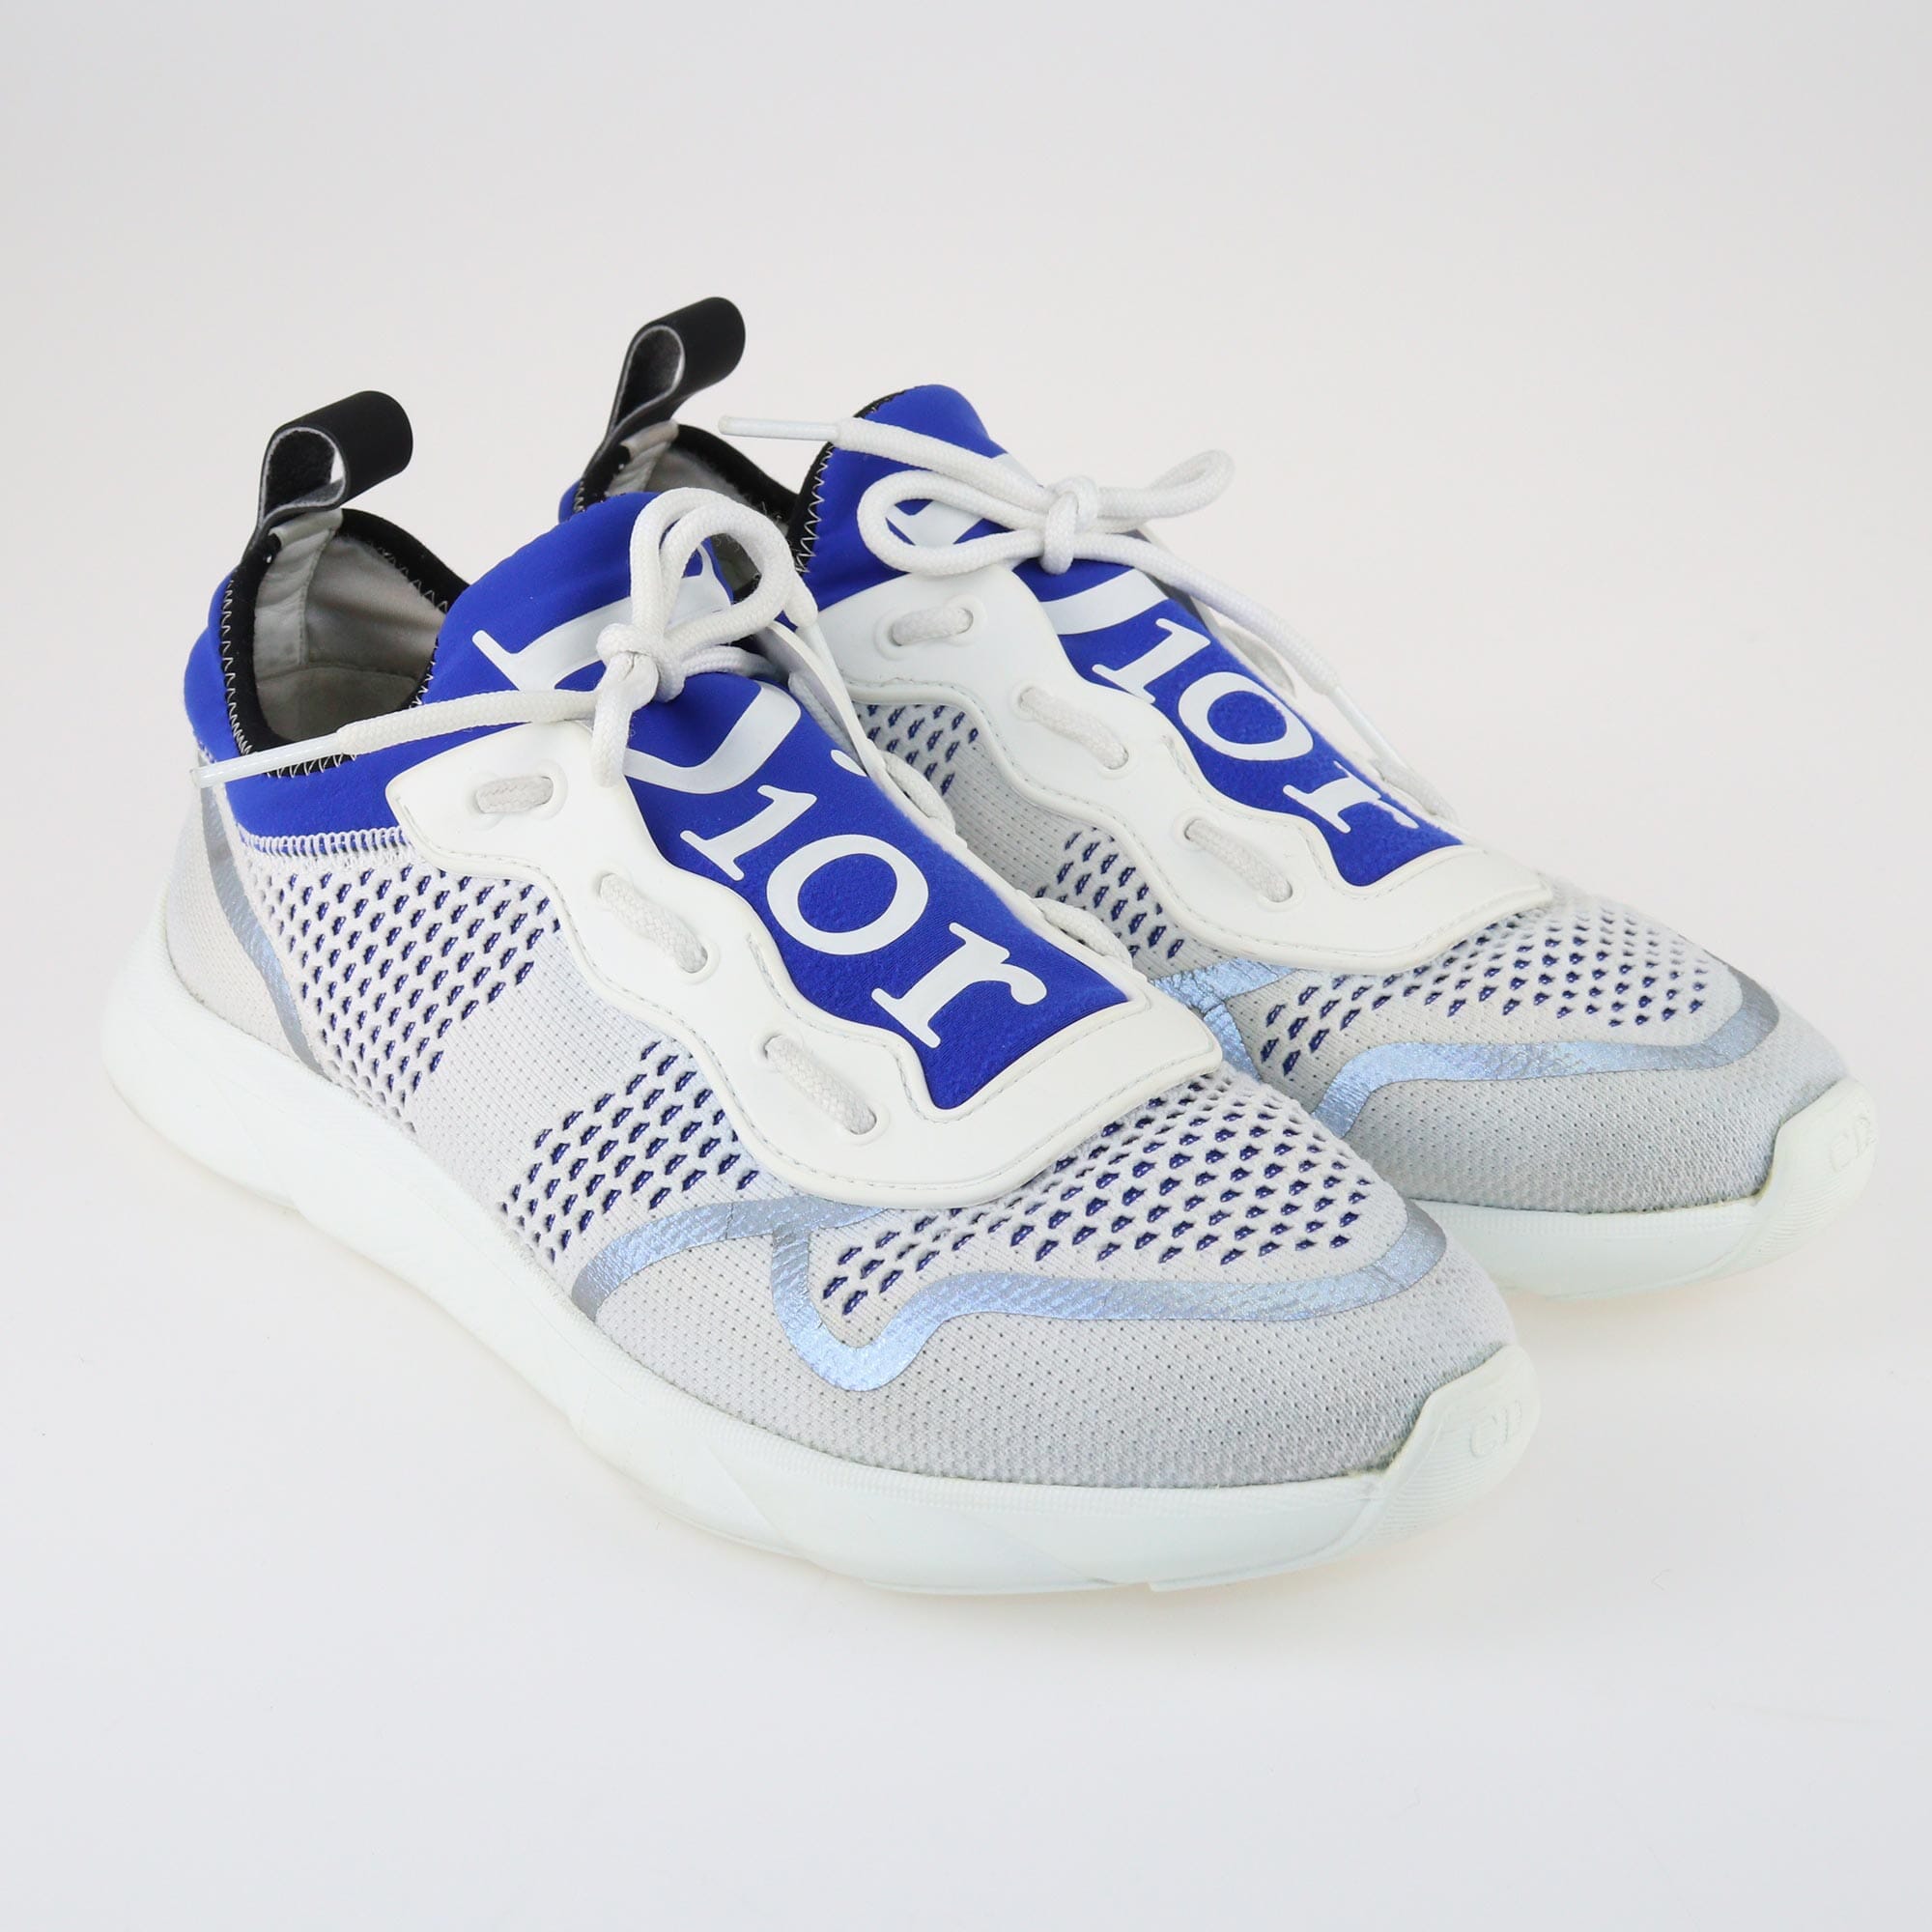 Dior Homme White/Blue B21 Neo Sneakers Shoes Dior 